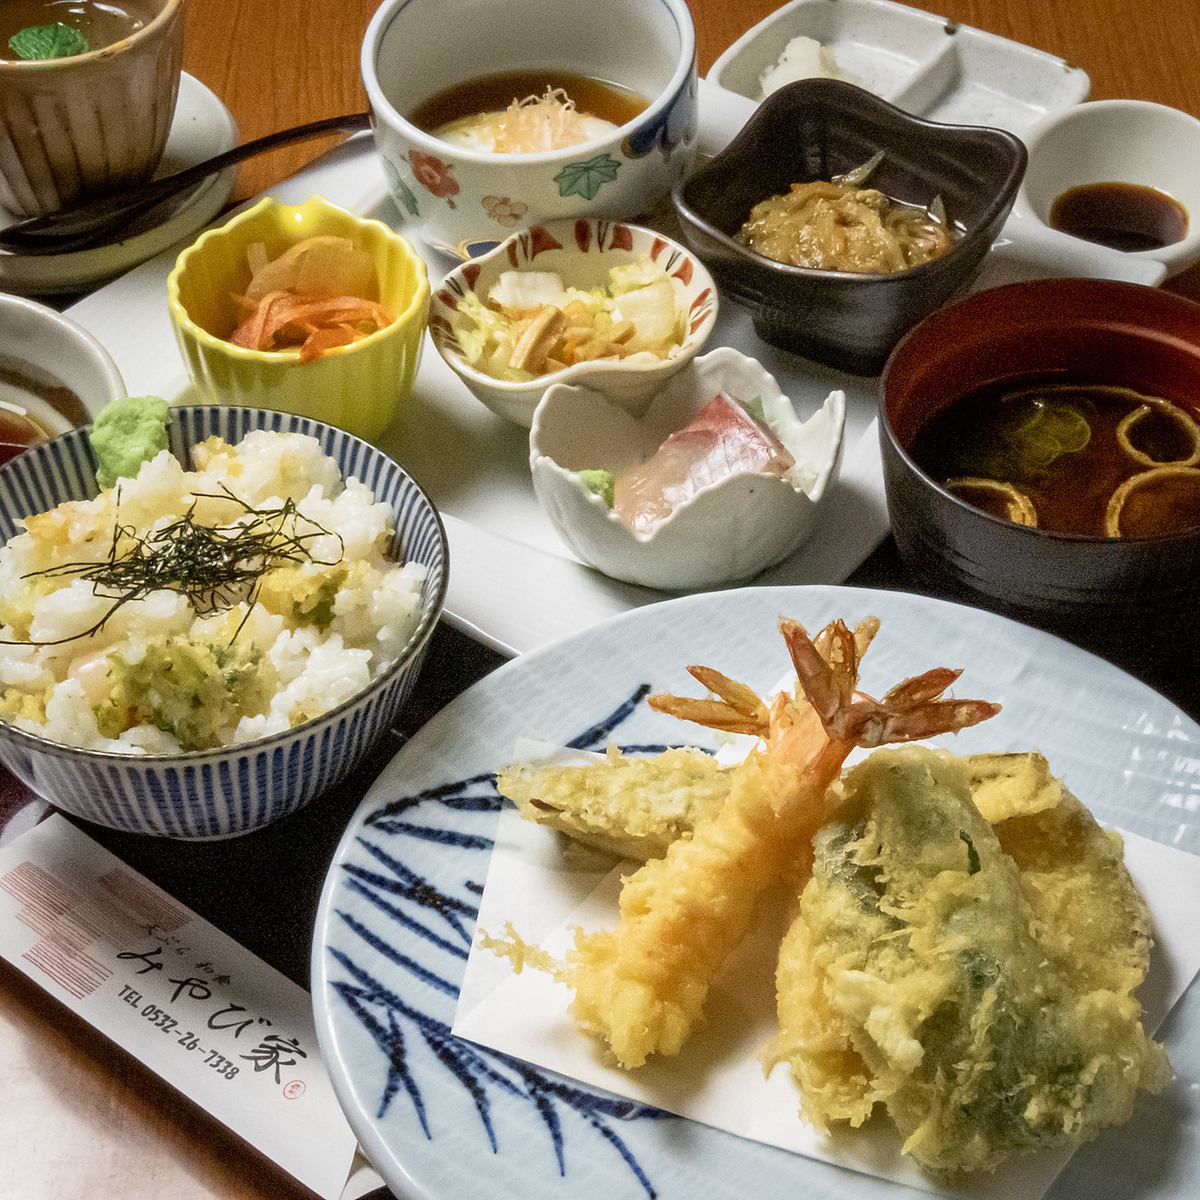 It is possible to add all-you-can-drink to kaiseki cuisine with advance reservation!